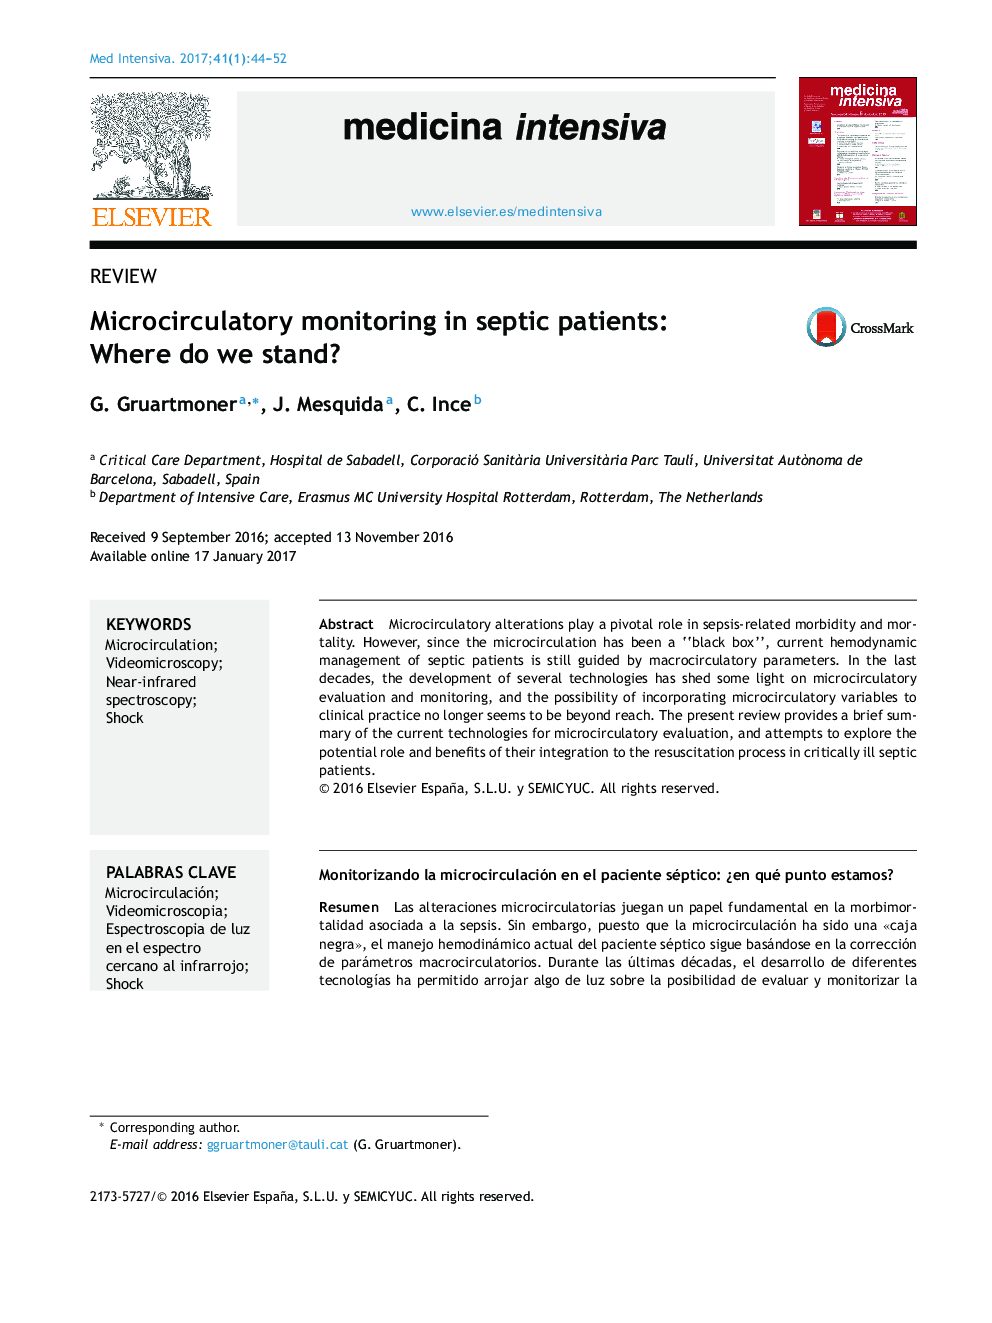 Microcirculatory monitoring in septic patients: Where do we stand?